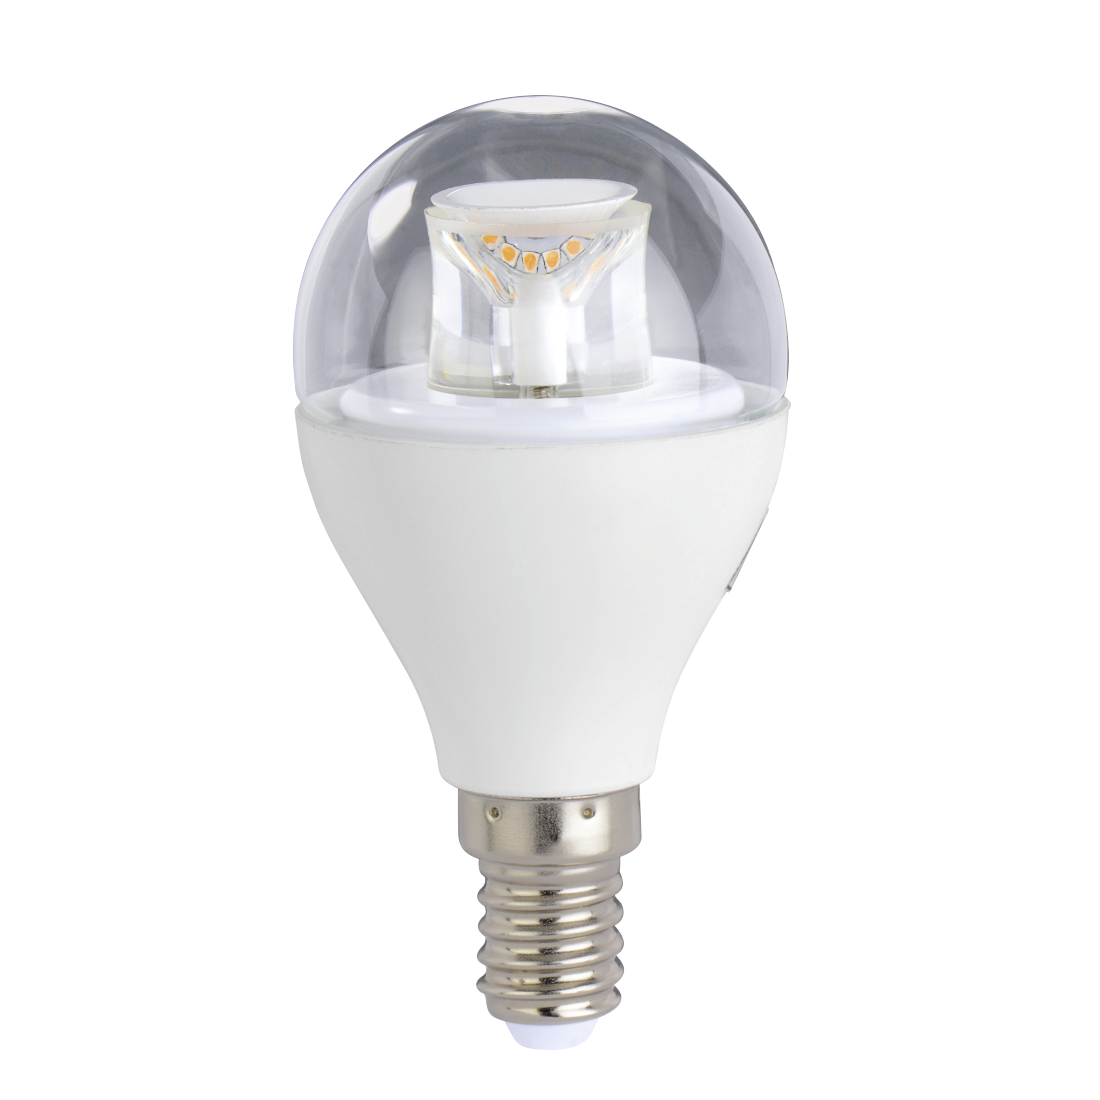 abx High-Res Image - Xavax, LED Bulb, E14, 470lm replaces 40W, drop bulb, warm white, dimmable